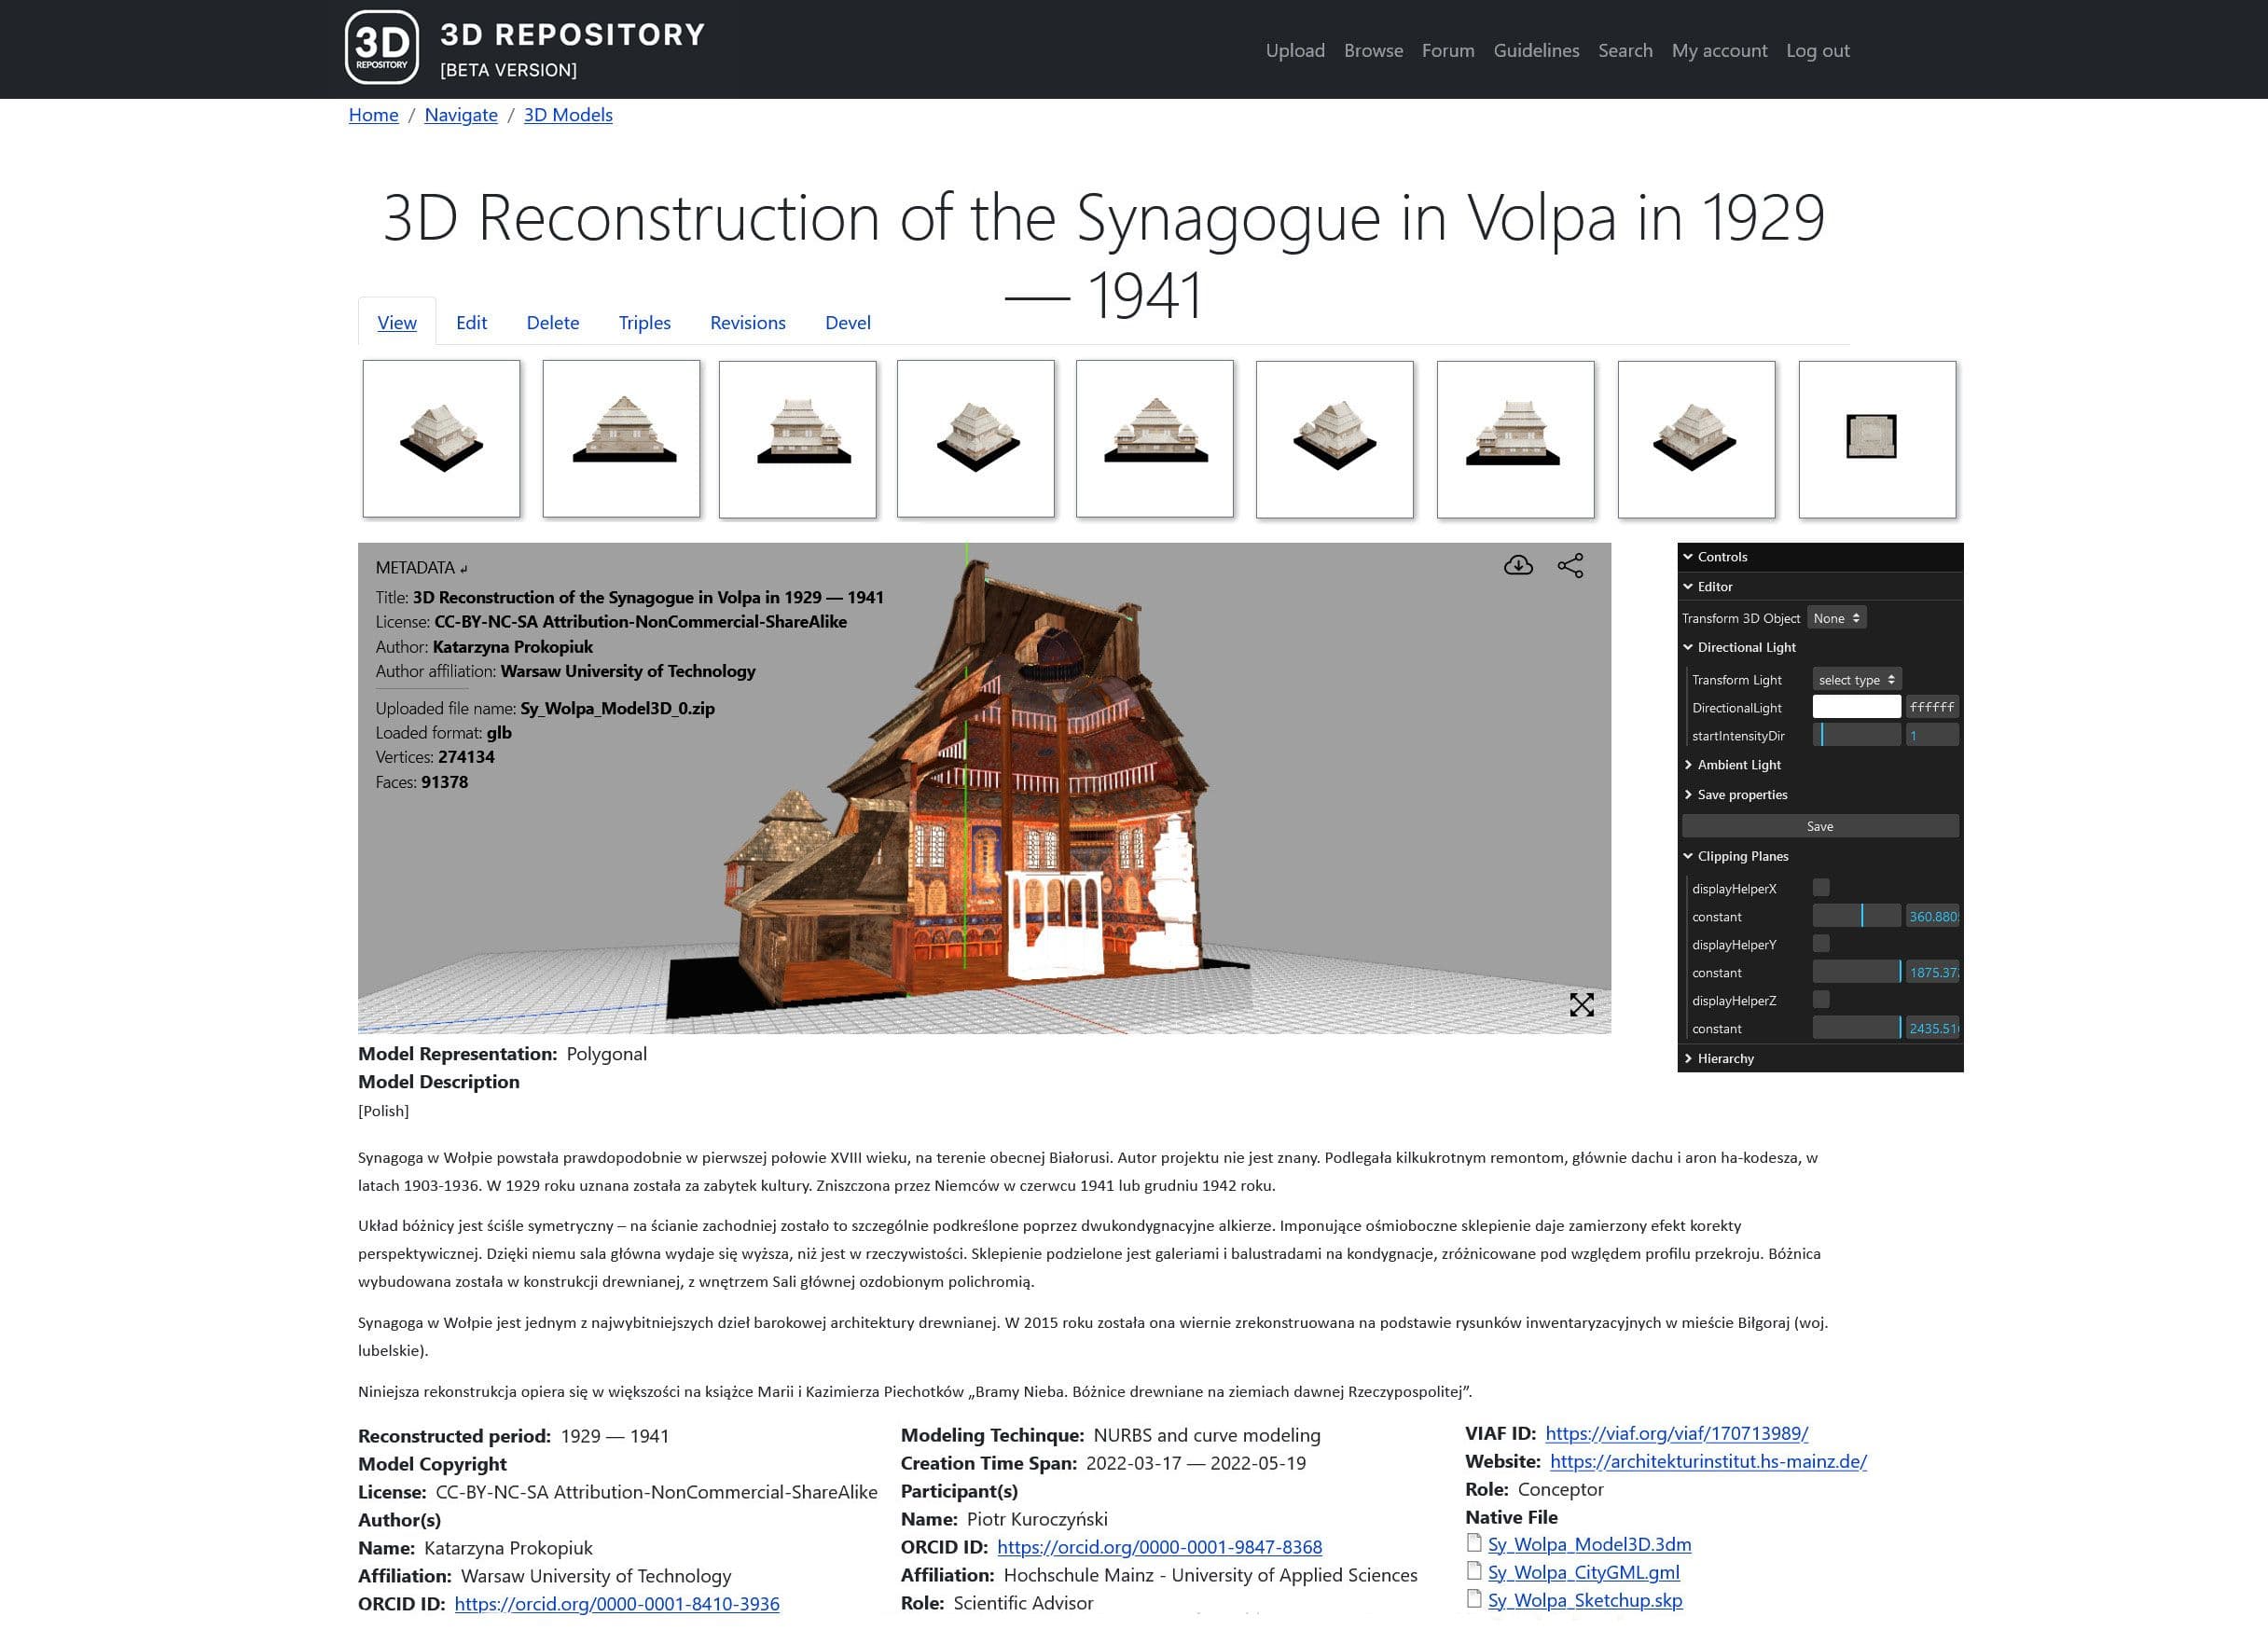 Picture of Fig. 3 Entry of reconstruction of the Synagogue in Volpa by Katarzyna Prokopiuk in WissKI-based 3D Repository